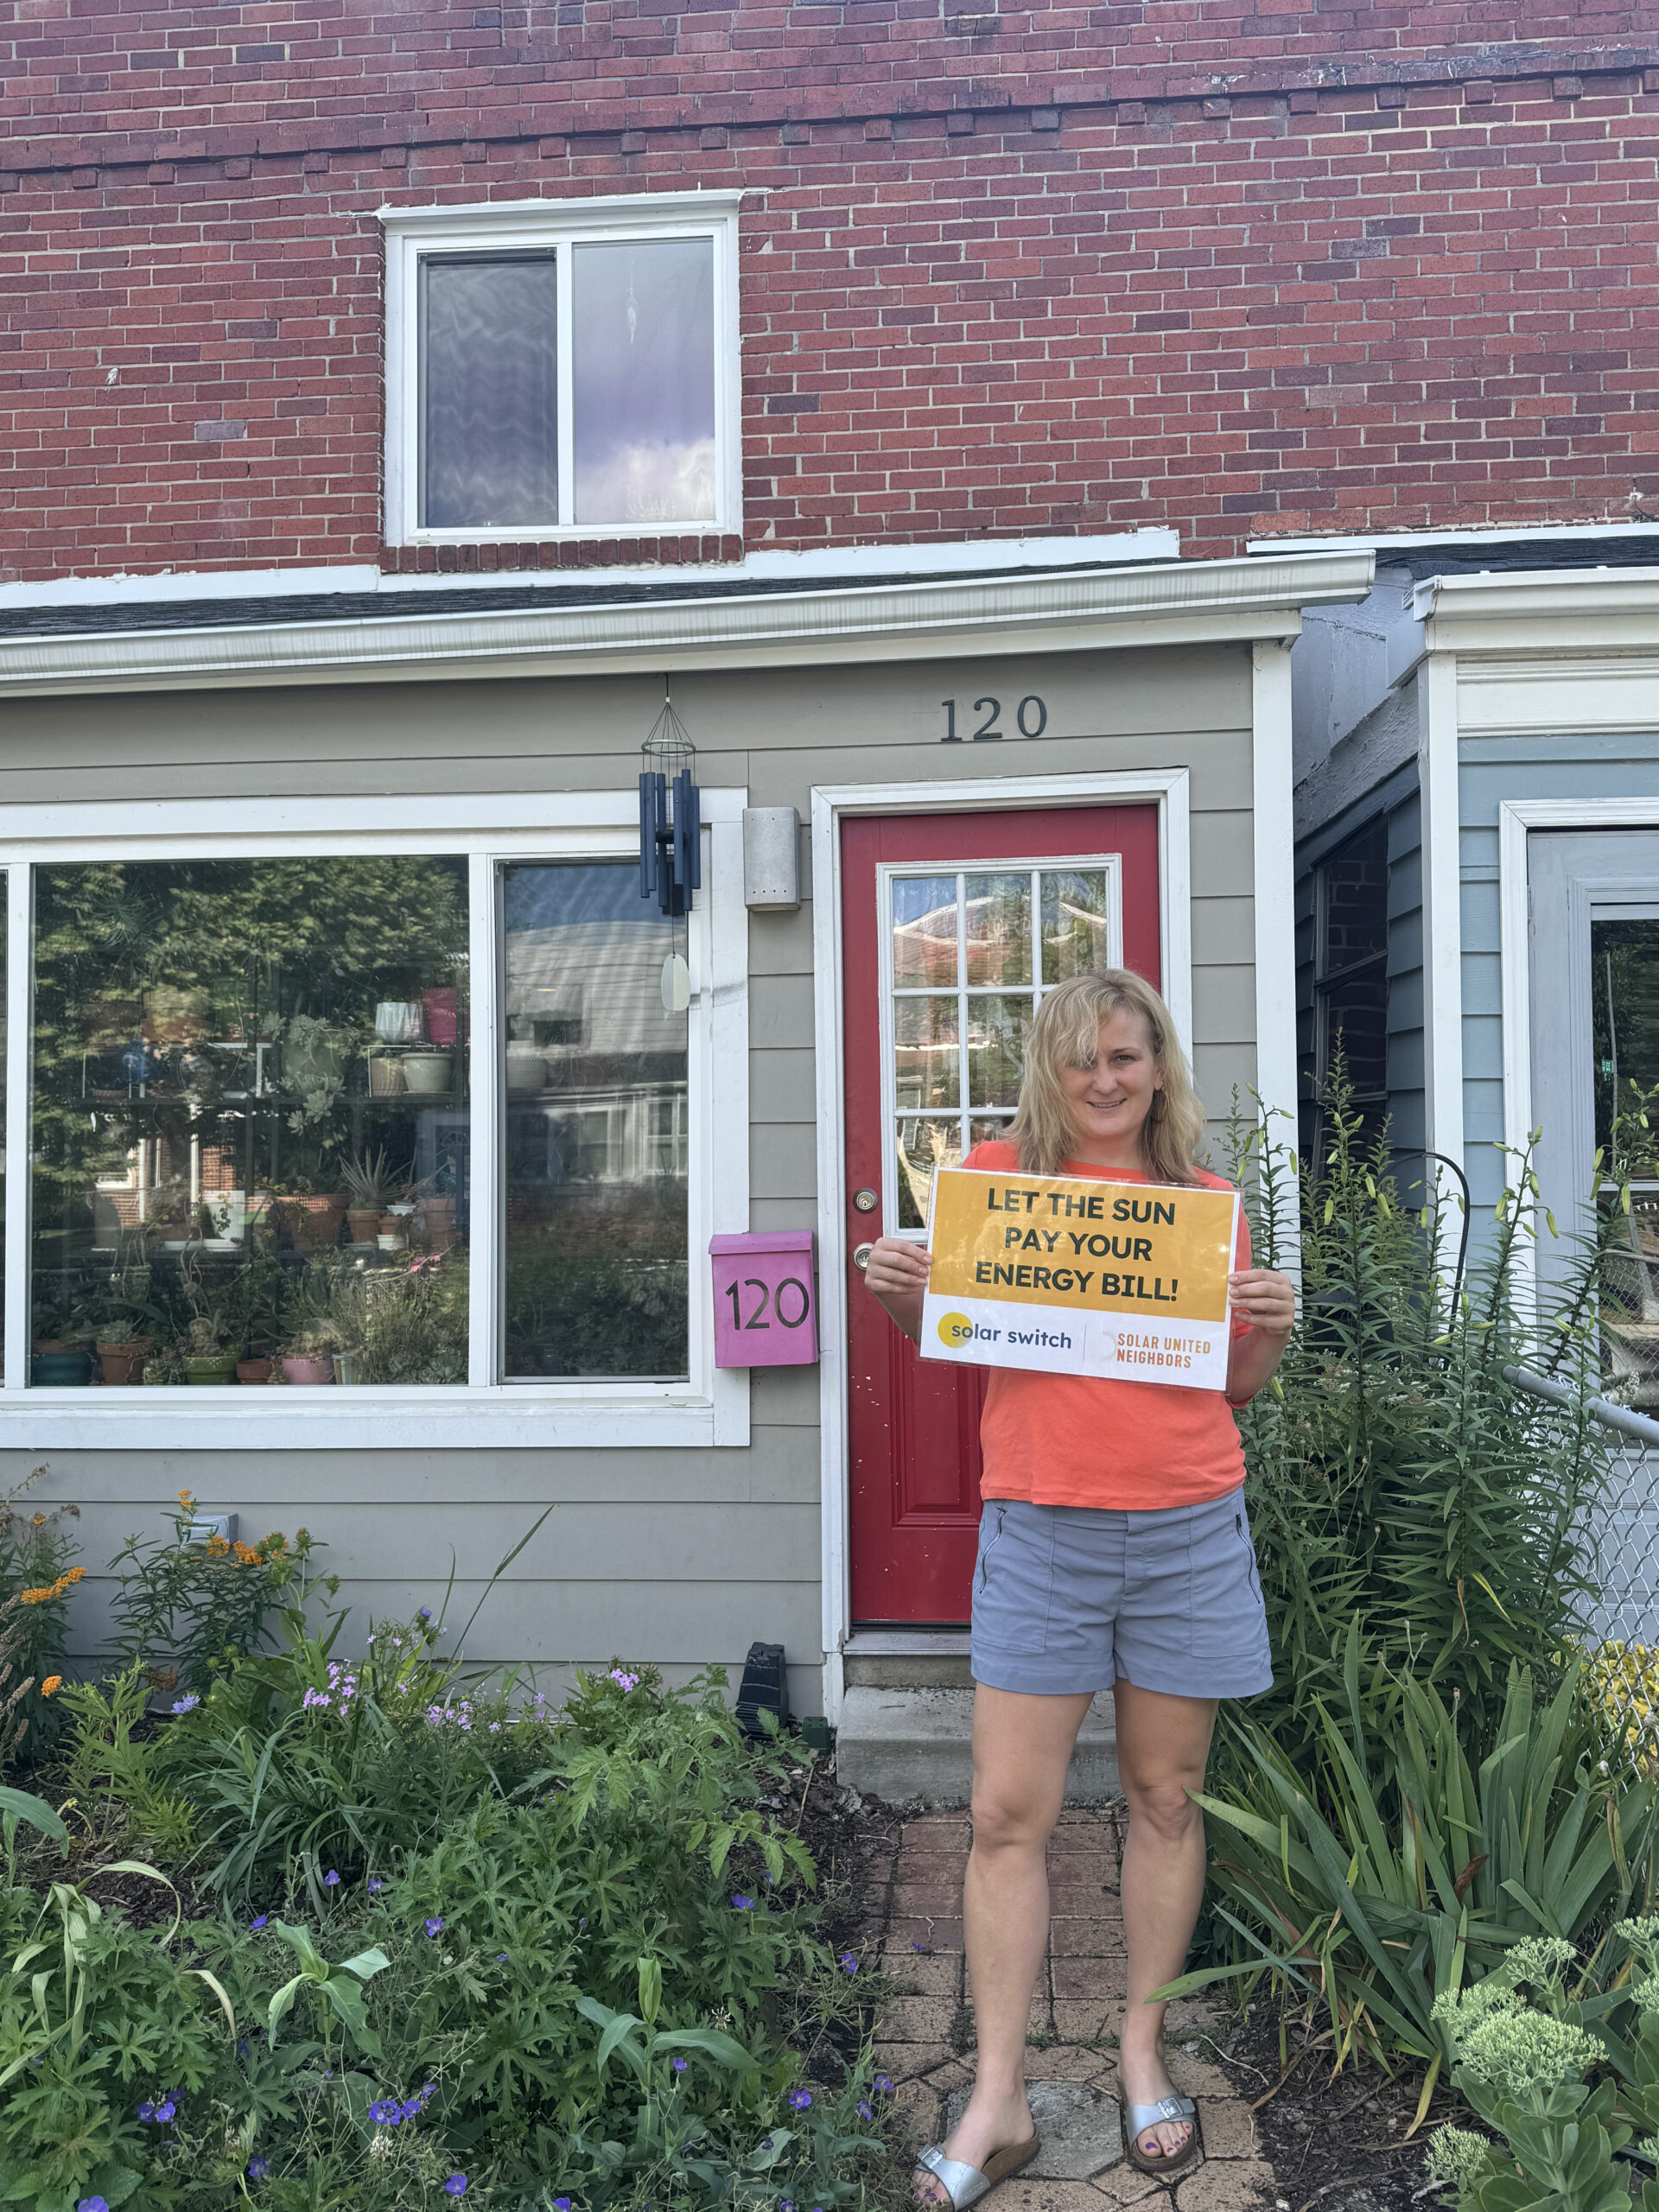 Woman standing in front of townhouse holding a sign that says "Let the sun pay your energy bill!"